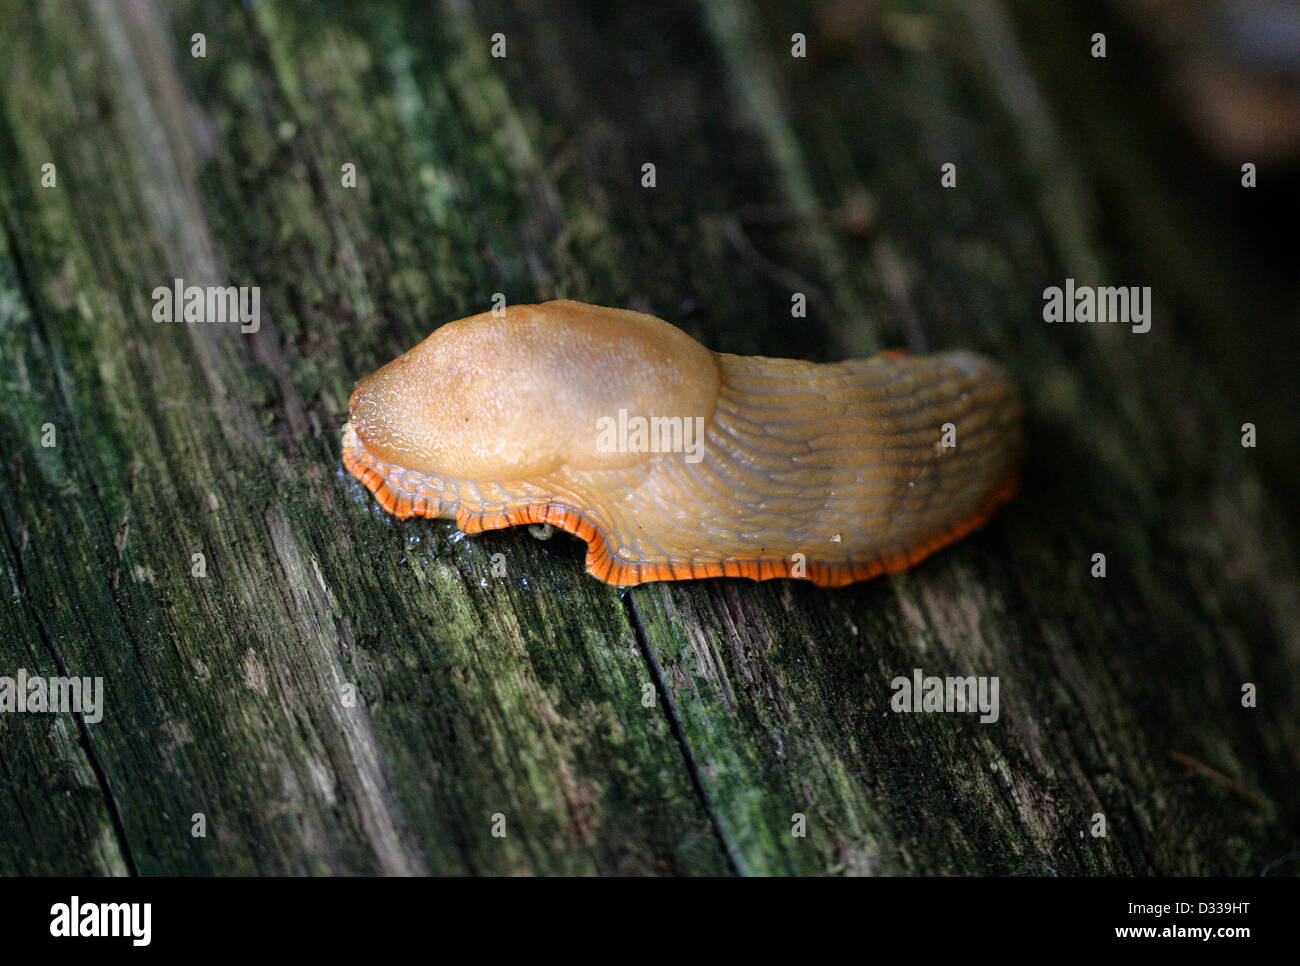 A Pale Form of the Black Slug, Arion ater, Arionidae, Mollusca. Stock Photo